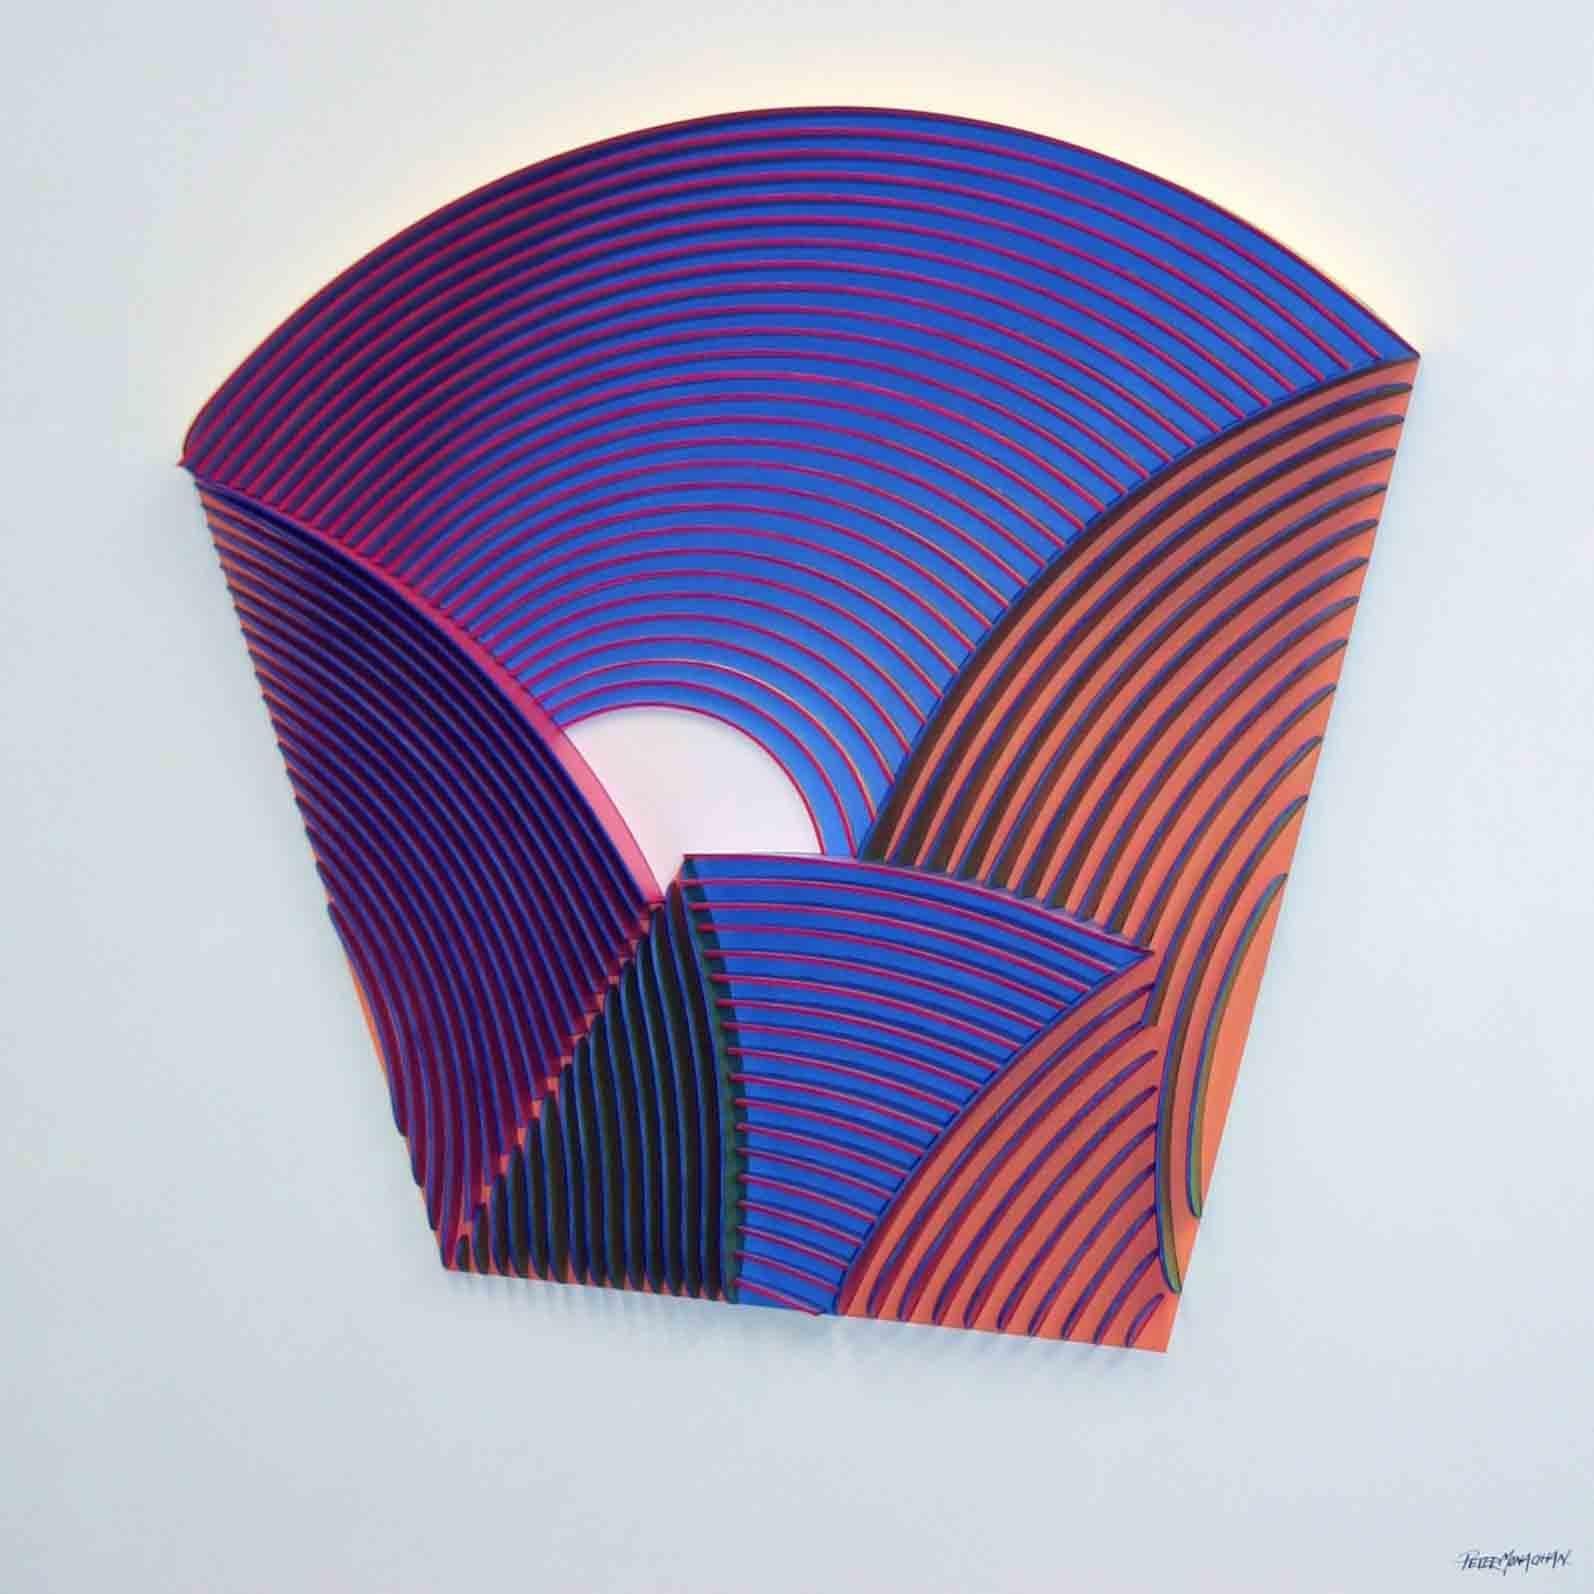 Fold C - Mixed Media Art by Peter Monaghan